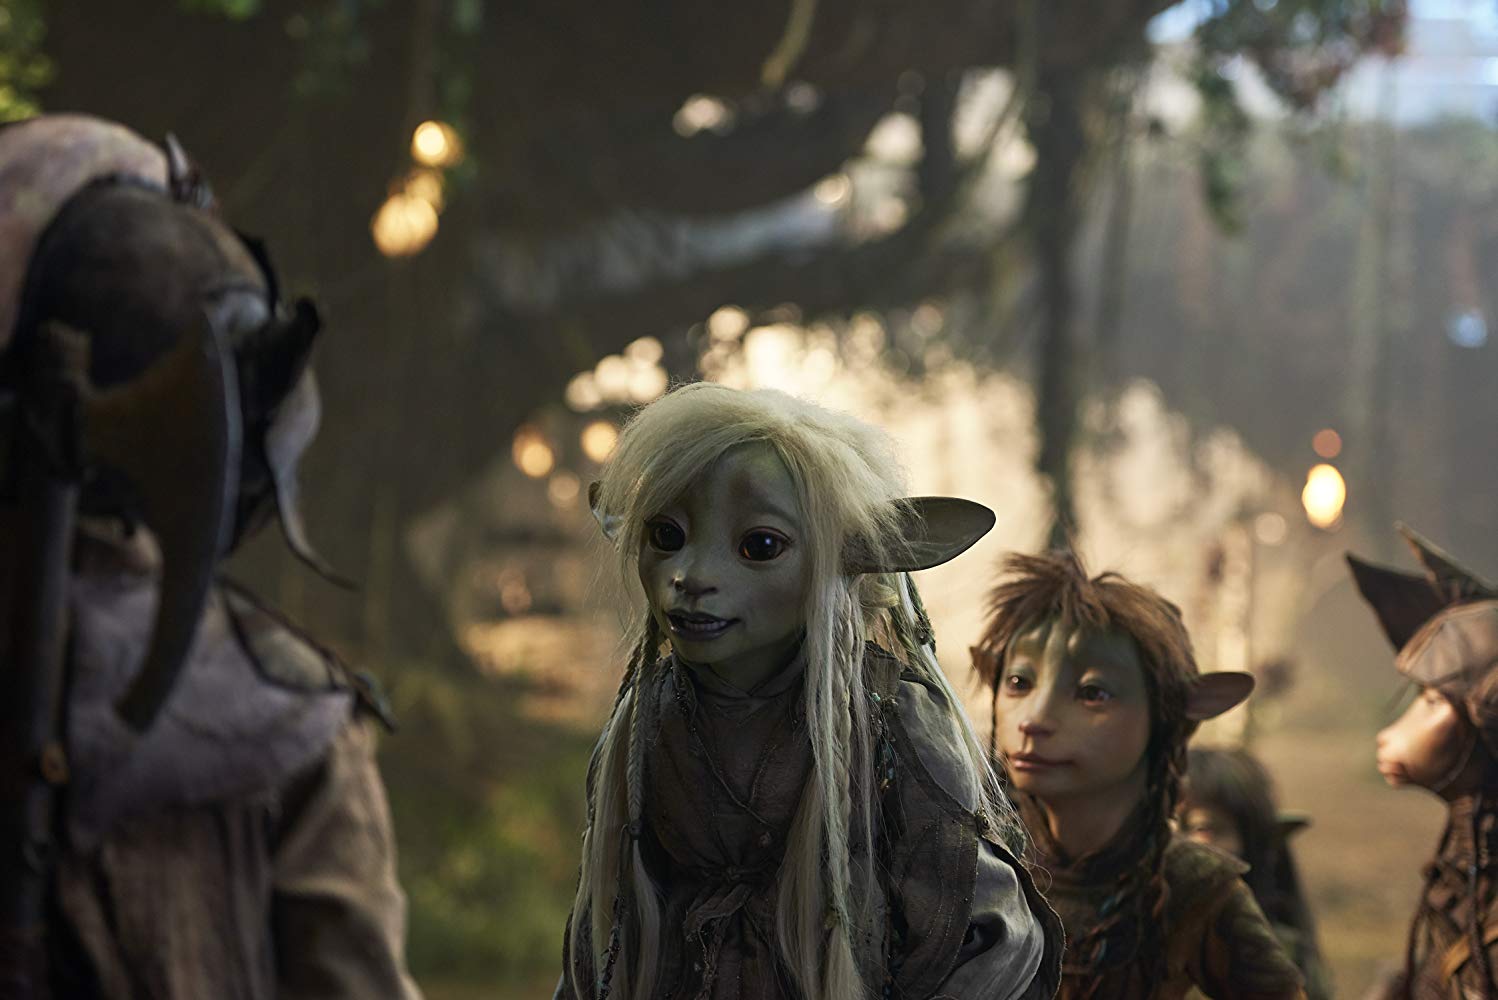 The Dark Crystal- Age of Resistance (2019)